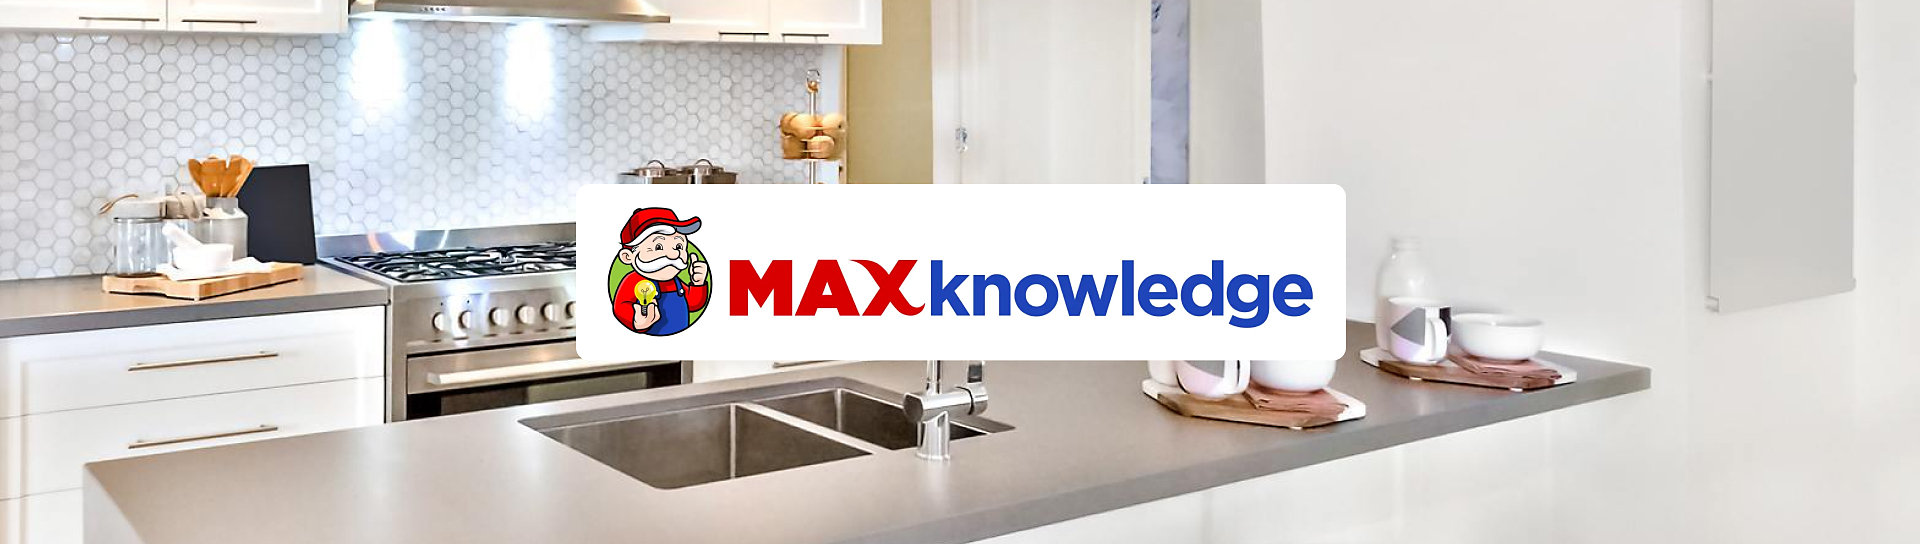 Max Knowledge logo with kitchen image in background